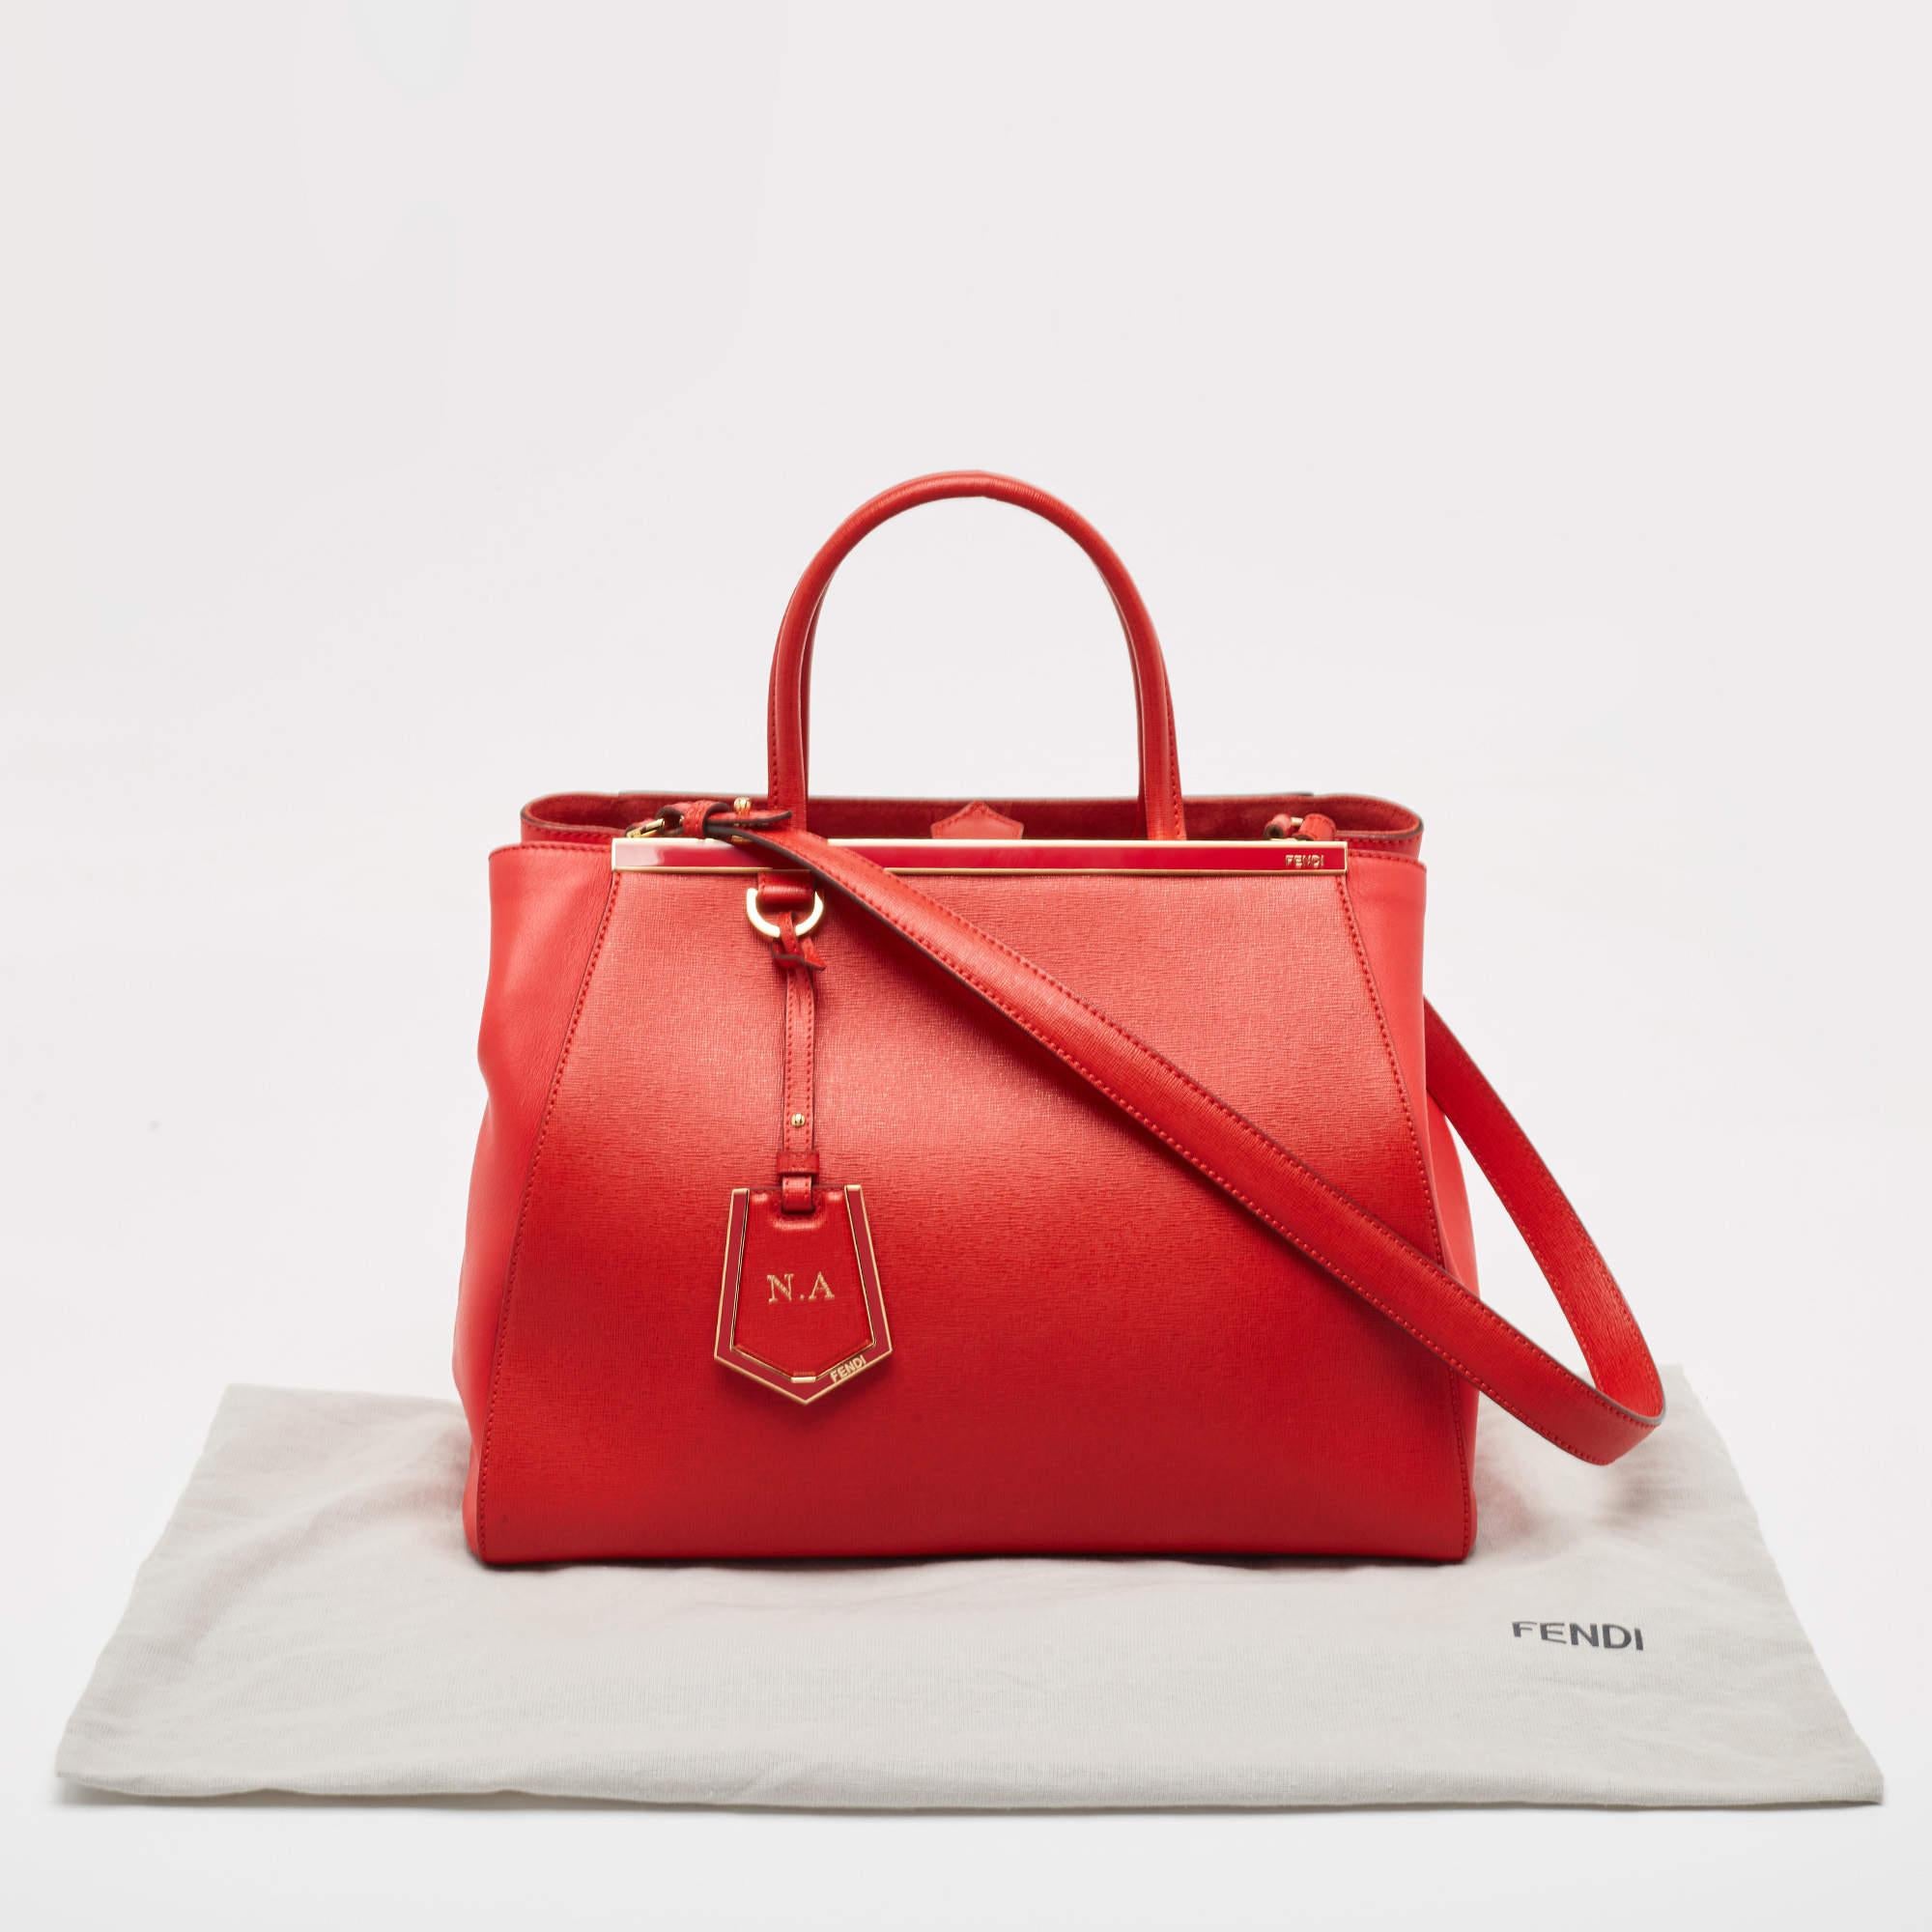 Fendi Red Leather Medium 2Jours Tote For Sale 11